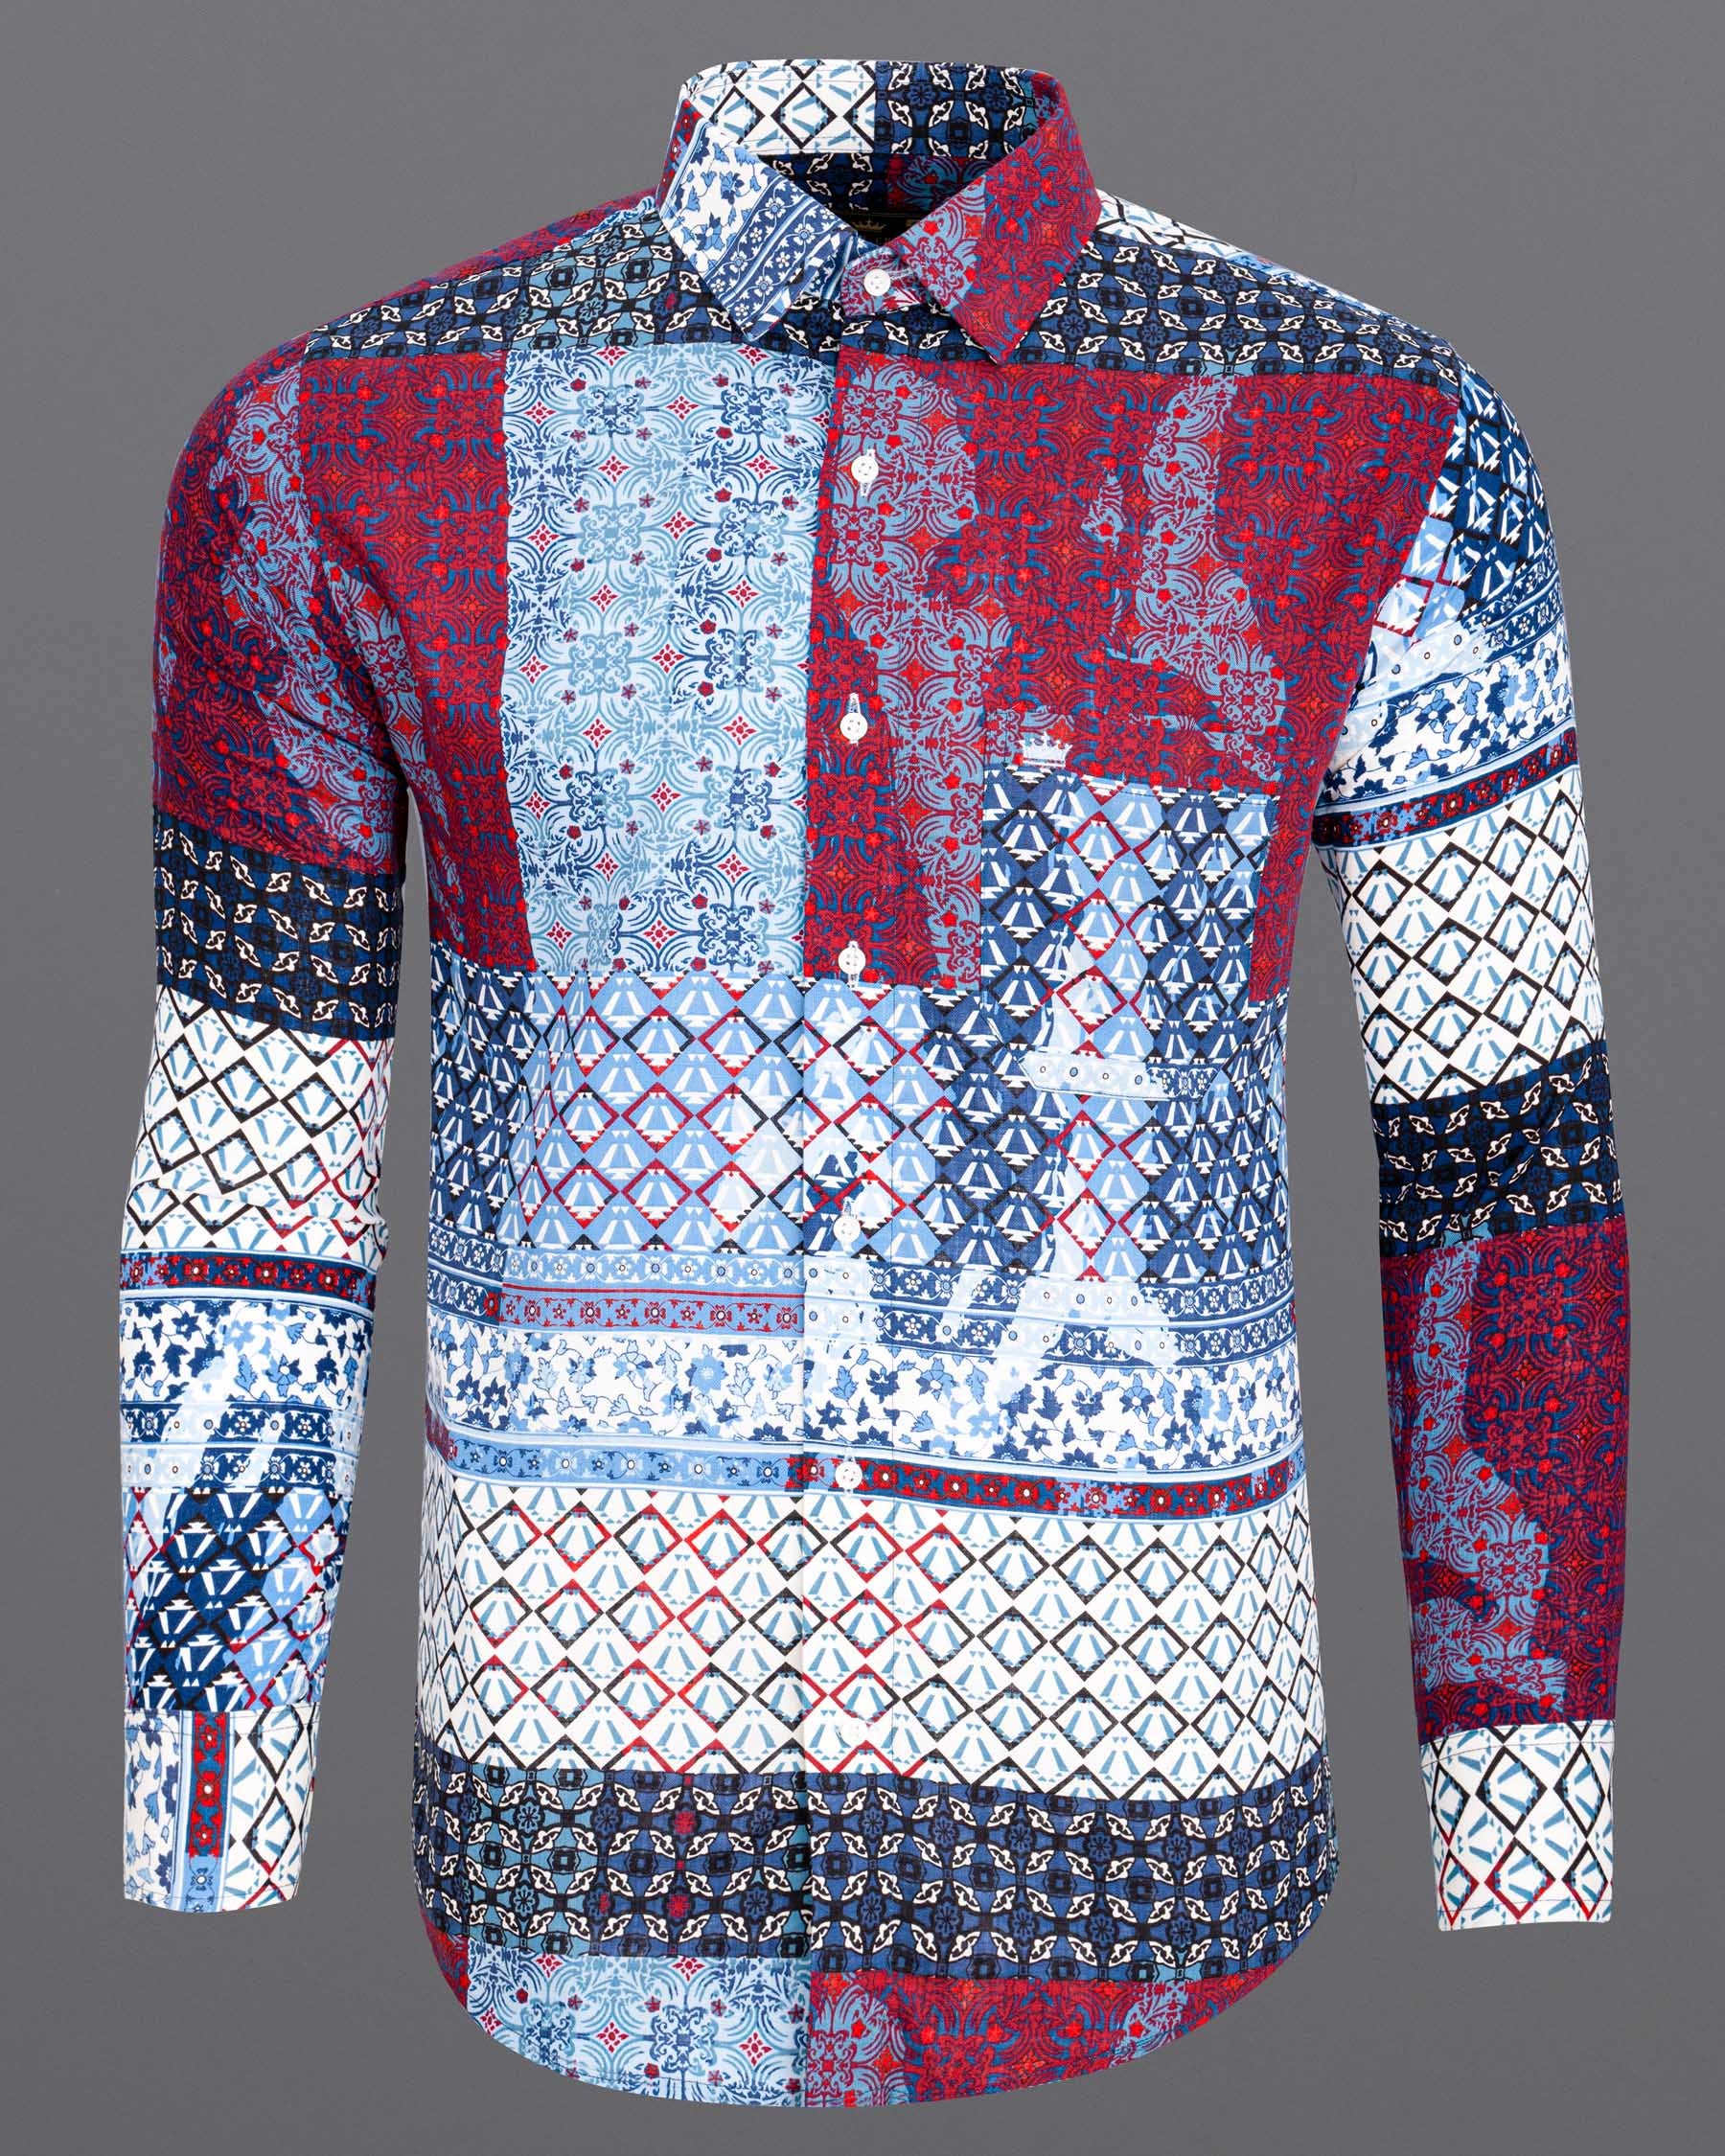 Danube with Cobalt Blue Multicolor Printed Luxurious Linen Shirt 6941-38,6941-H-38,6941-39,6941-H-39,6941-40,6941-H-40,6941-42,6941-H-42,6941-44,6941-H-44,6941-46,6941-H-46,6941-48,6941-H-48,6941-50,6941-H-50,6941-52,6941-H-52